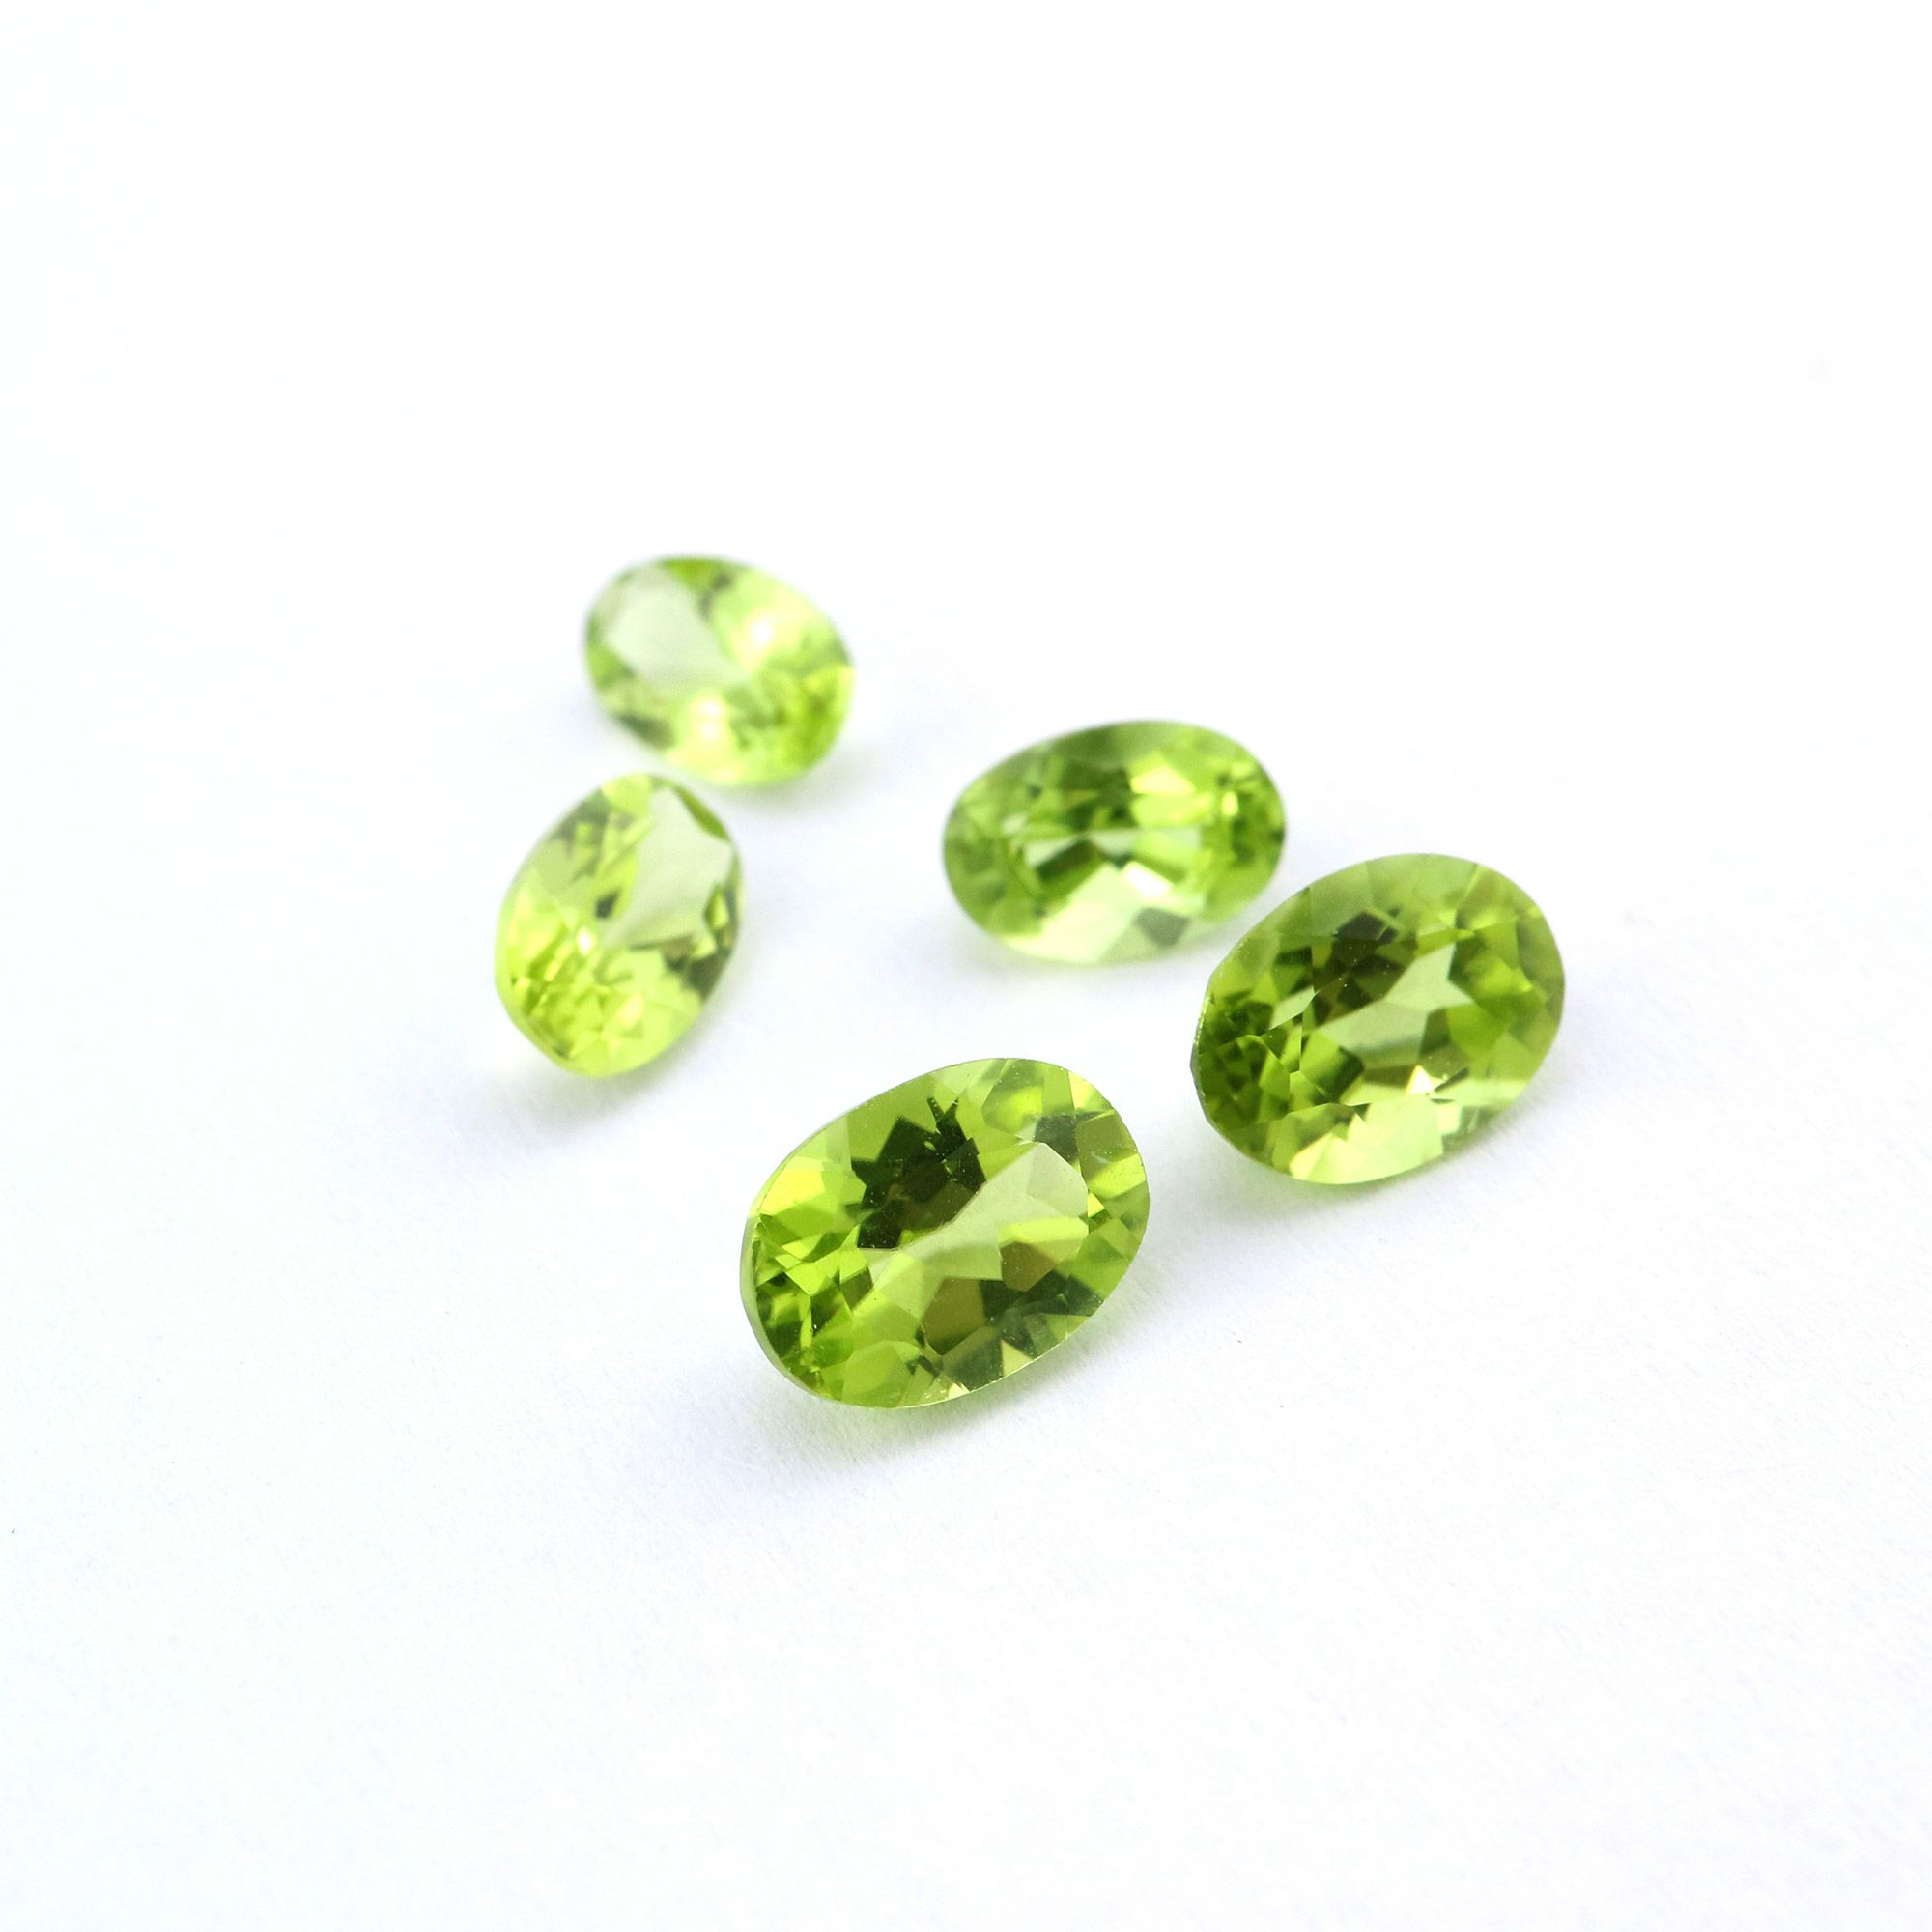 1Pcs Oval Green Peridot August Birthstone Faceted Cut Loose Gemstone Natural Semi Precious Stone DIY Jewelry Supplies 4120122 - Click Image to Close